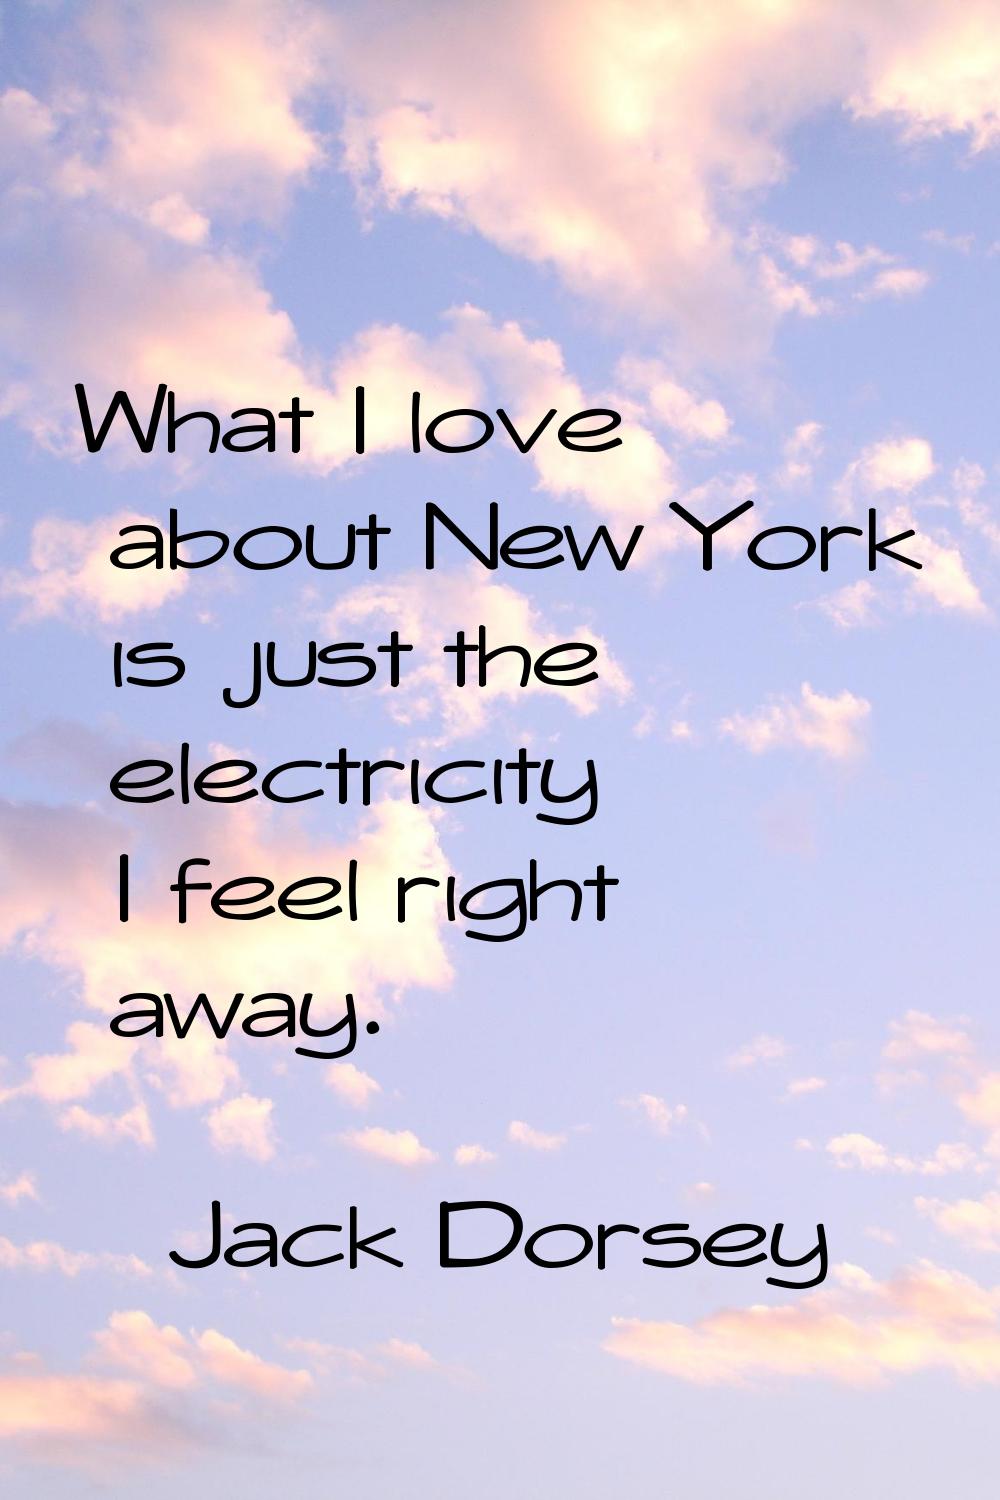 What I love about New York is just the electricity I feel right away.